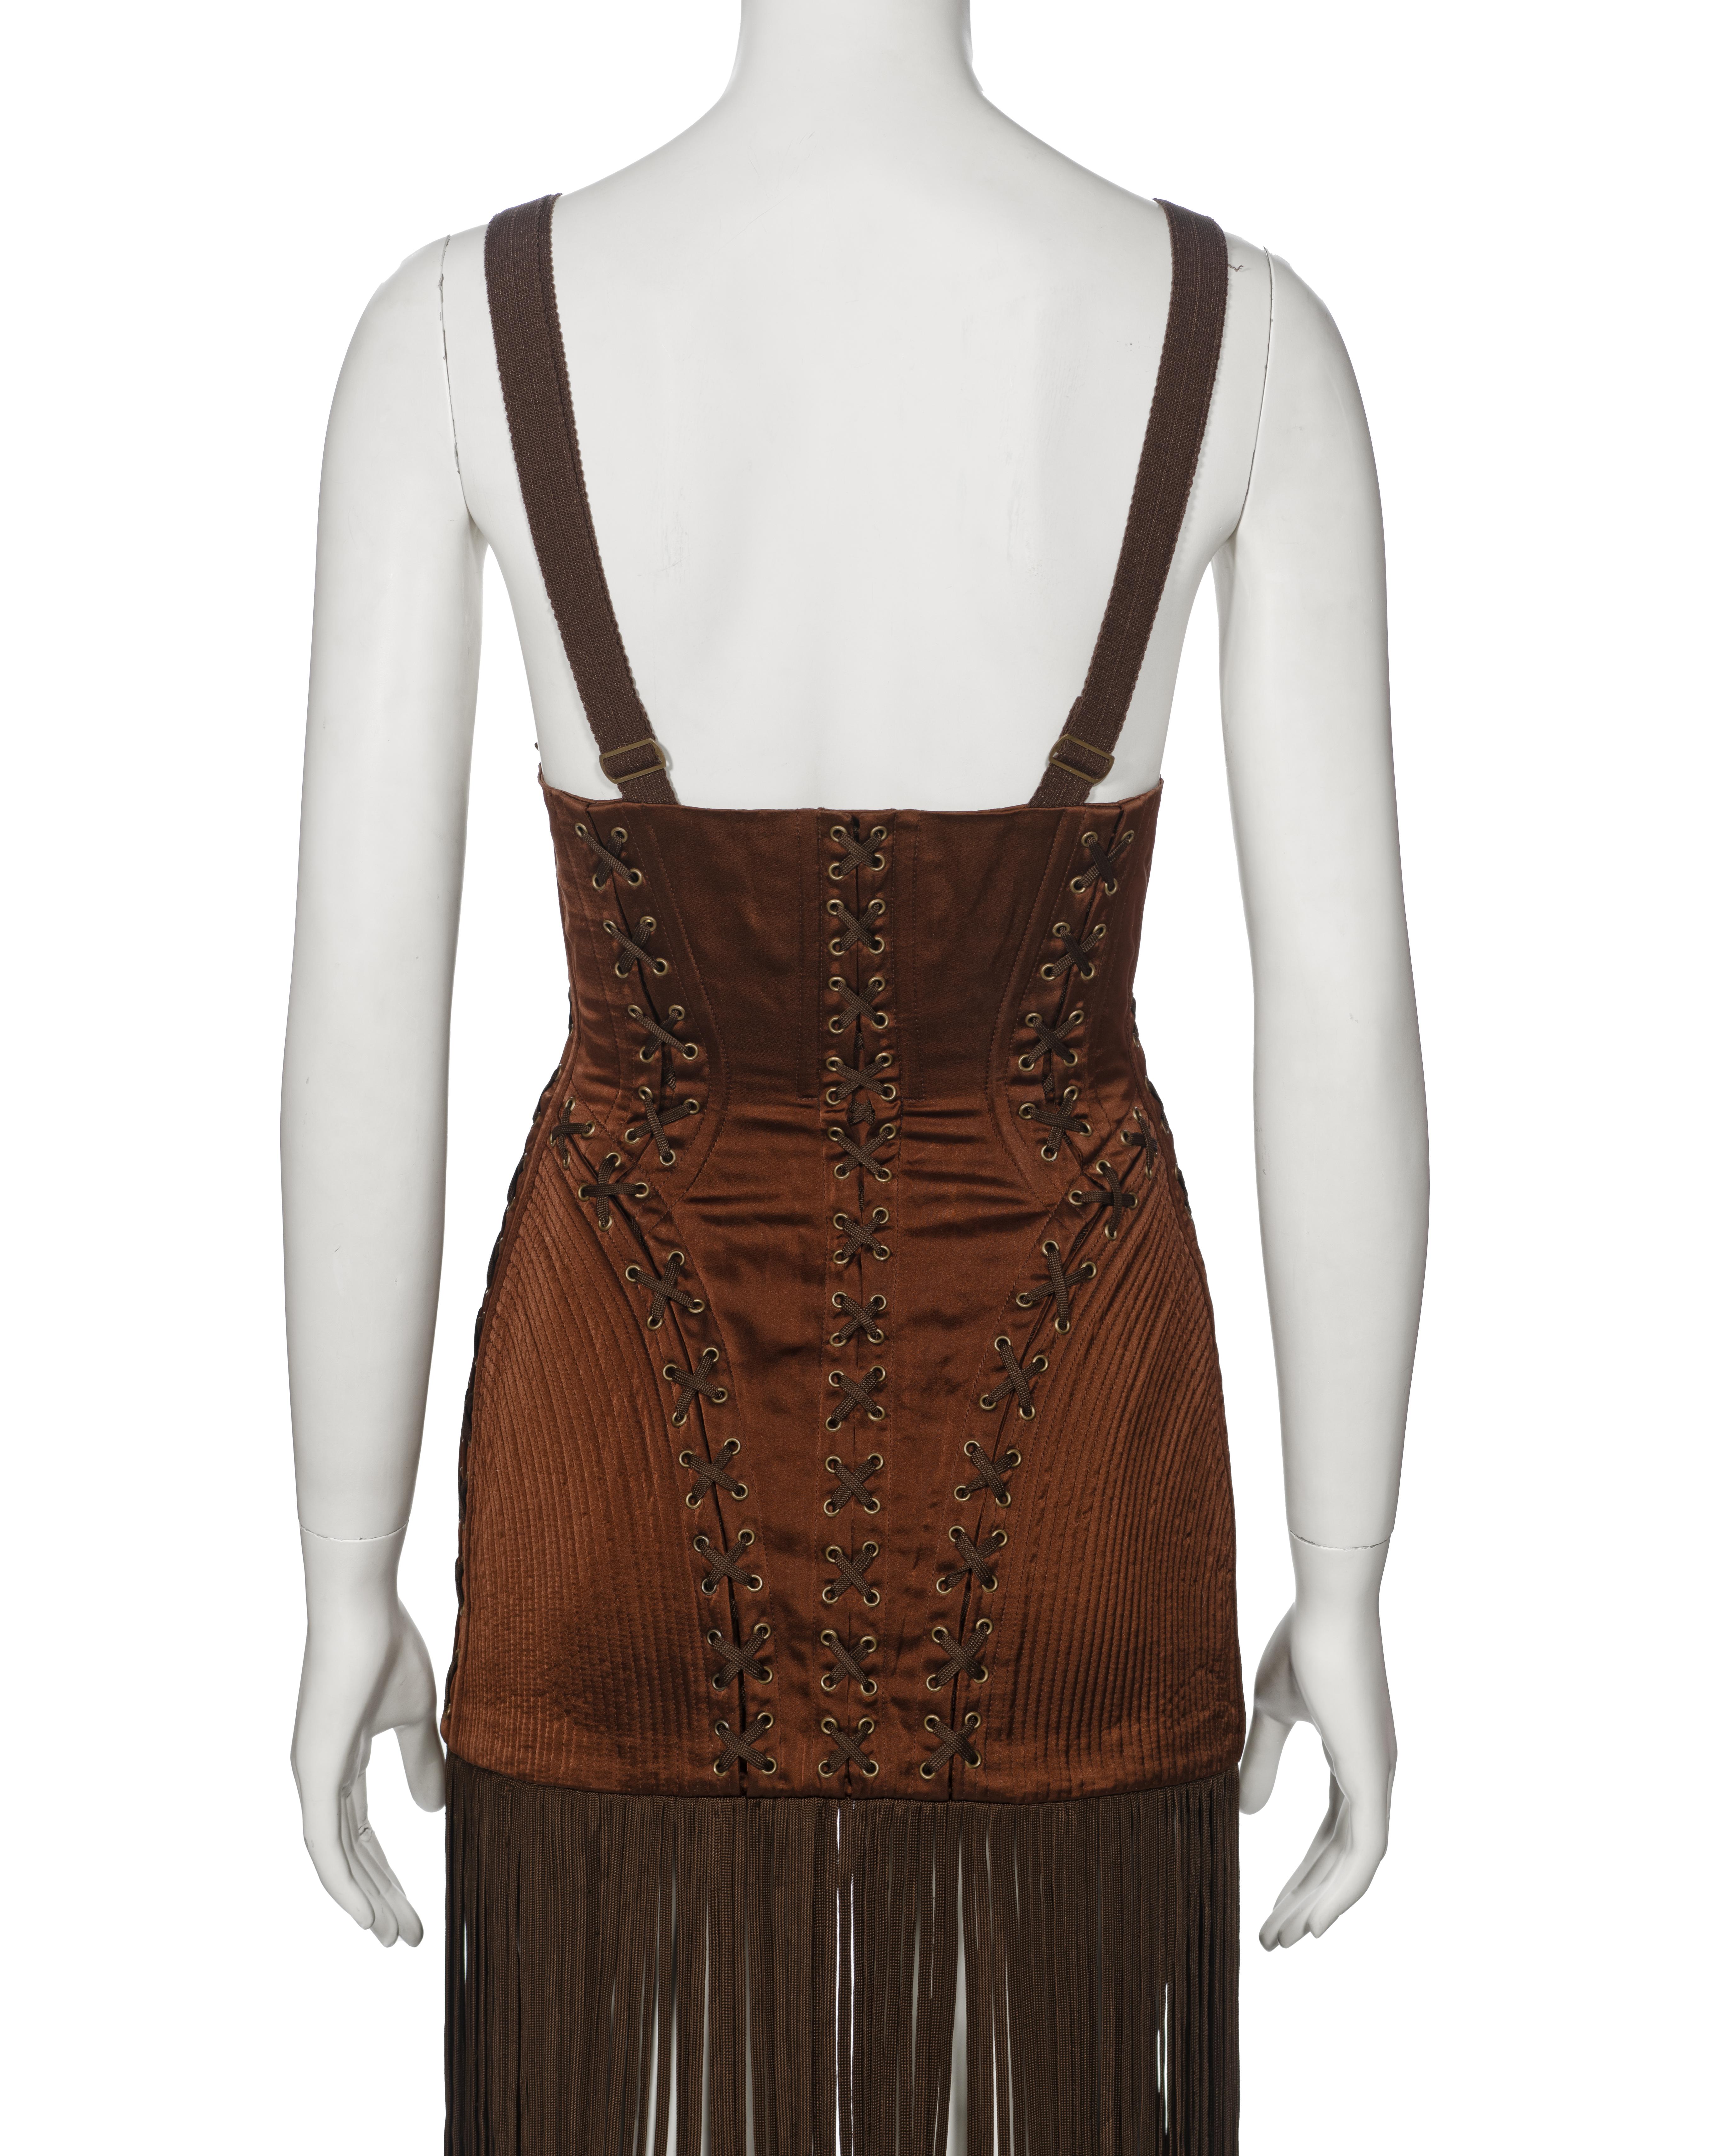 Jean Paul Gaultier Brown Corset Dress with Cone Bra and Fringed Hem, fw 1990 For Sale 11